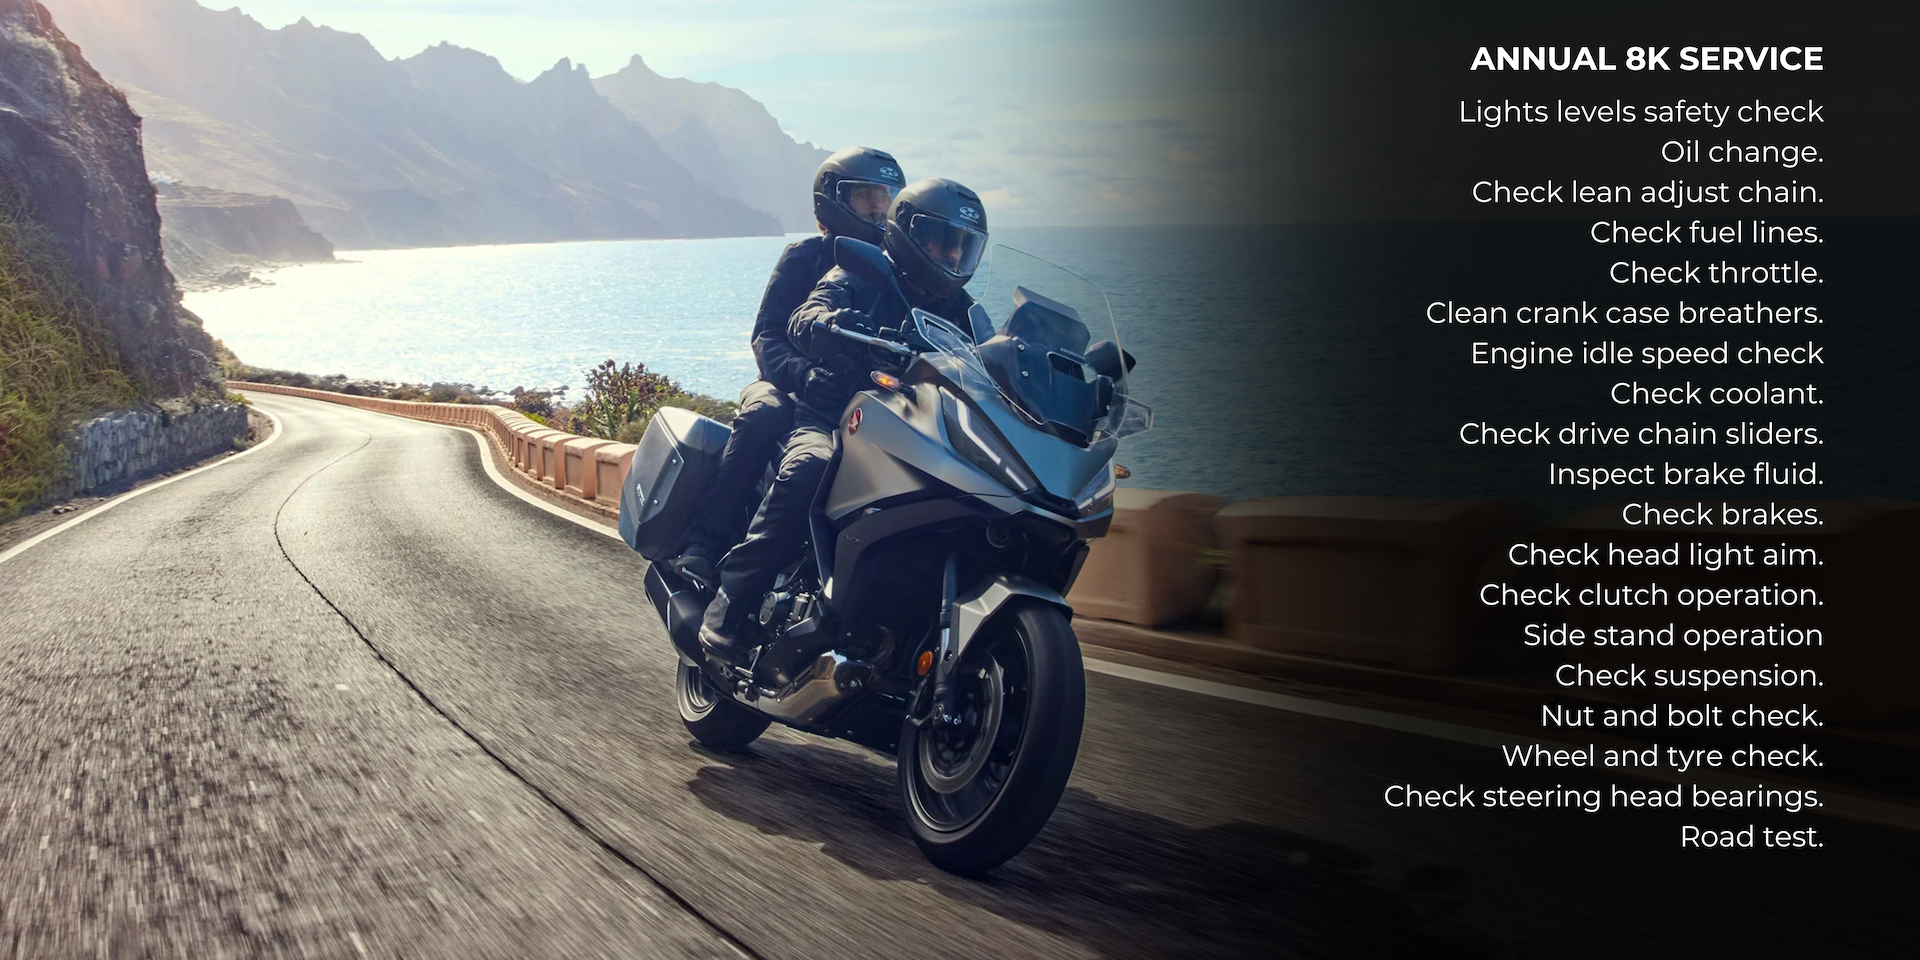 Honda of Bournemouth, New Bikes from Honda, Offers and Deal NT1100.jpg